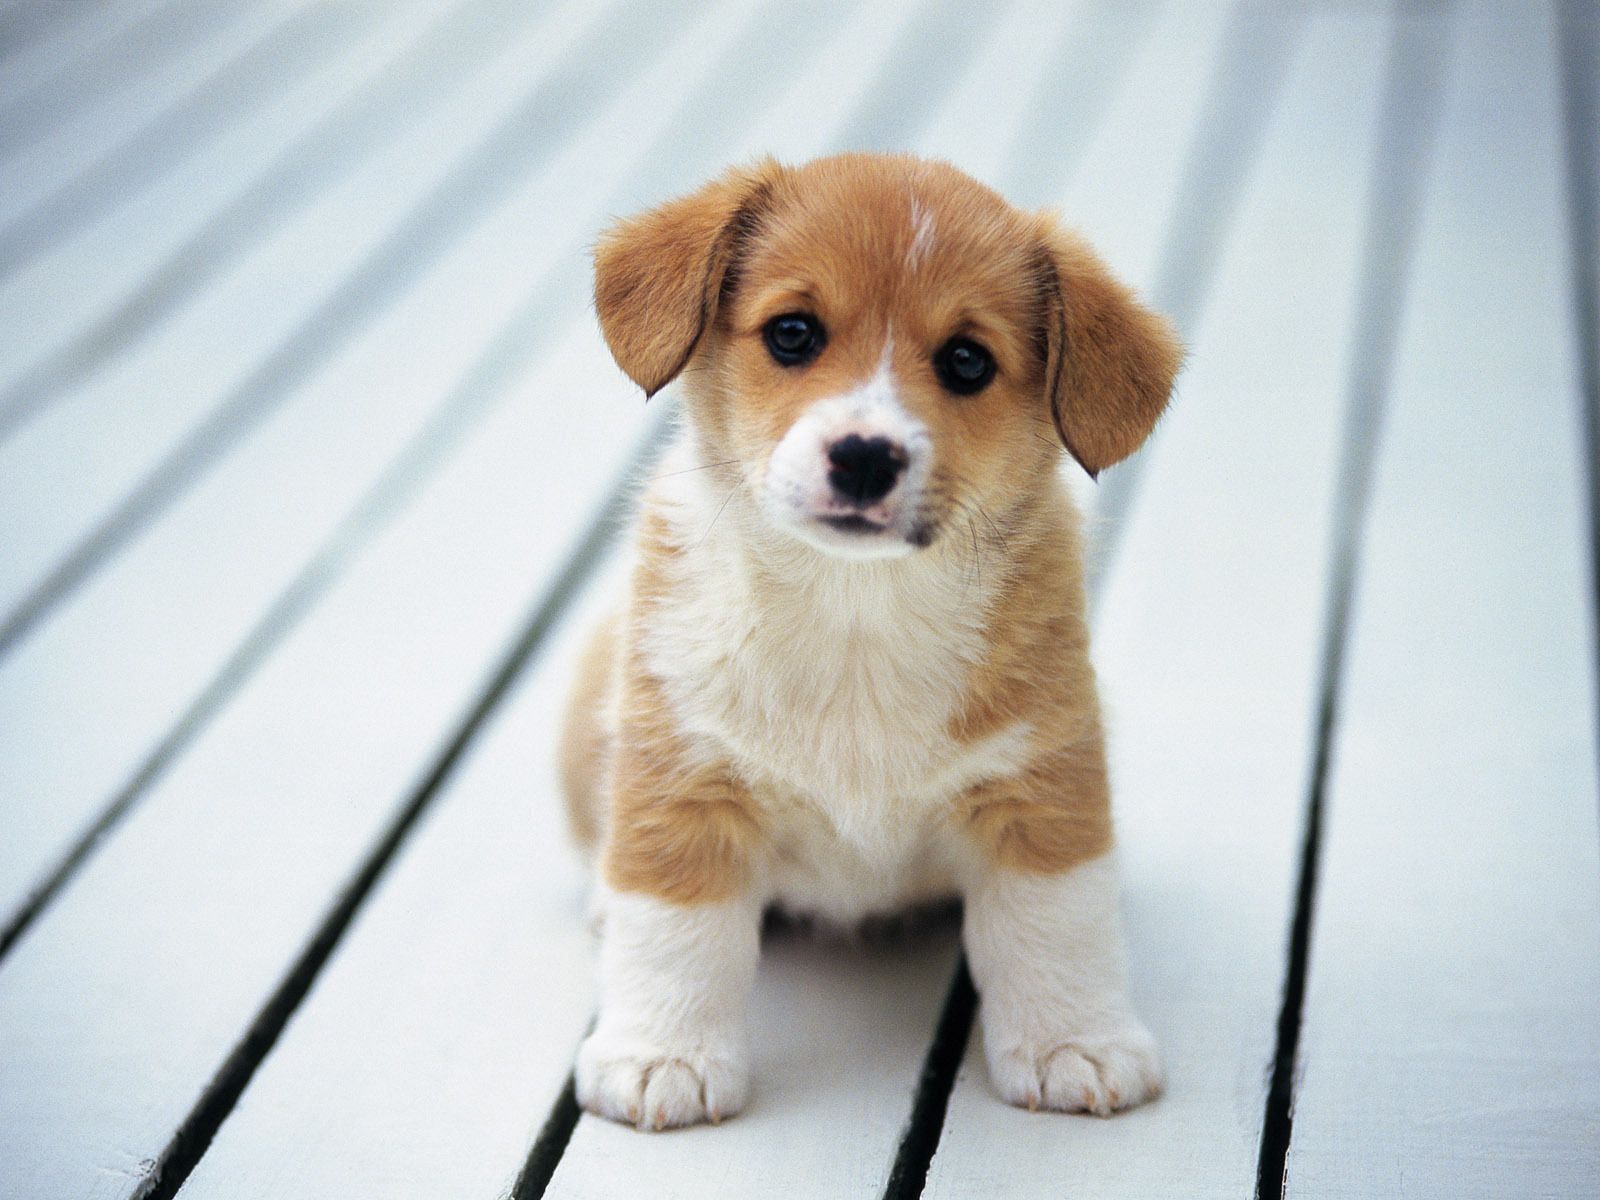 Cute puppies wallpapers hd